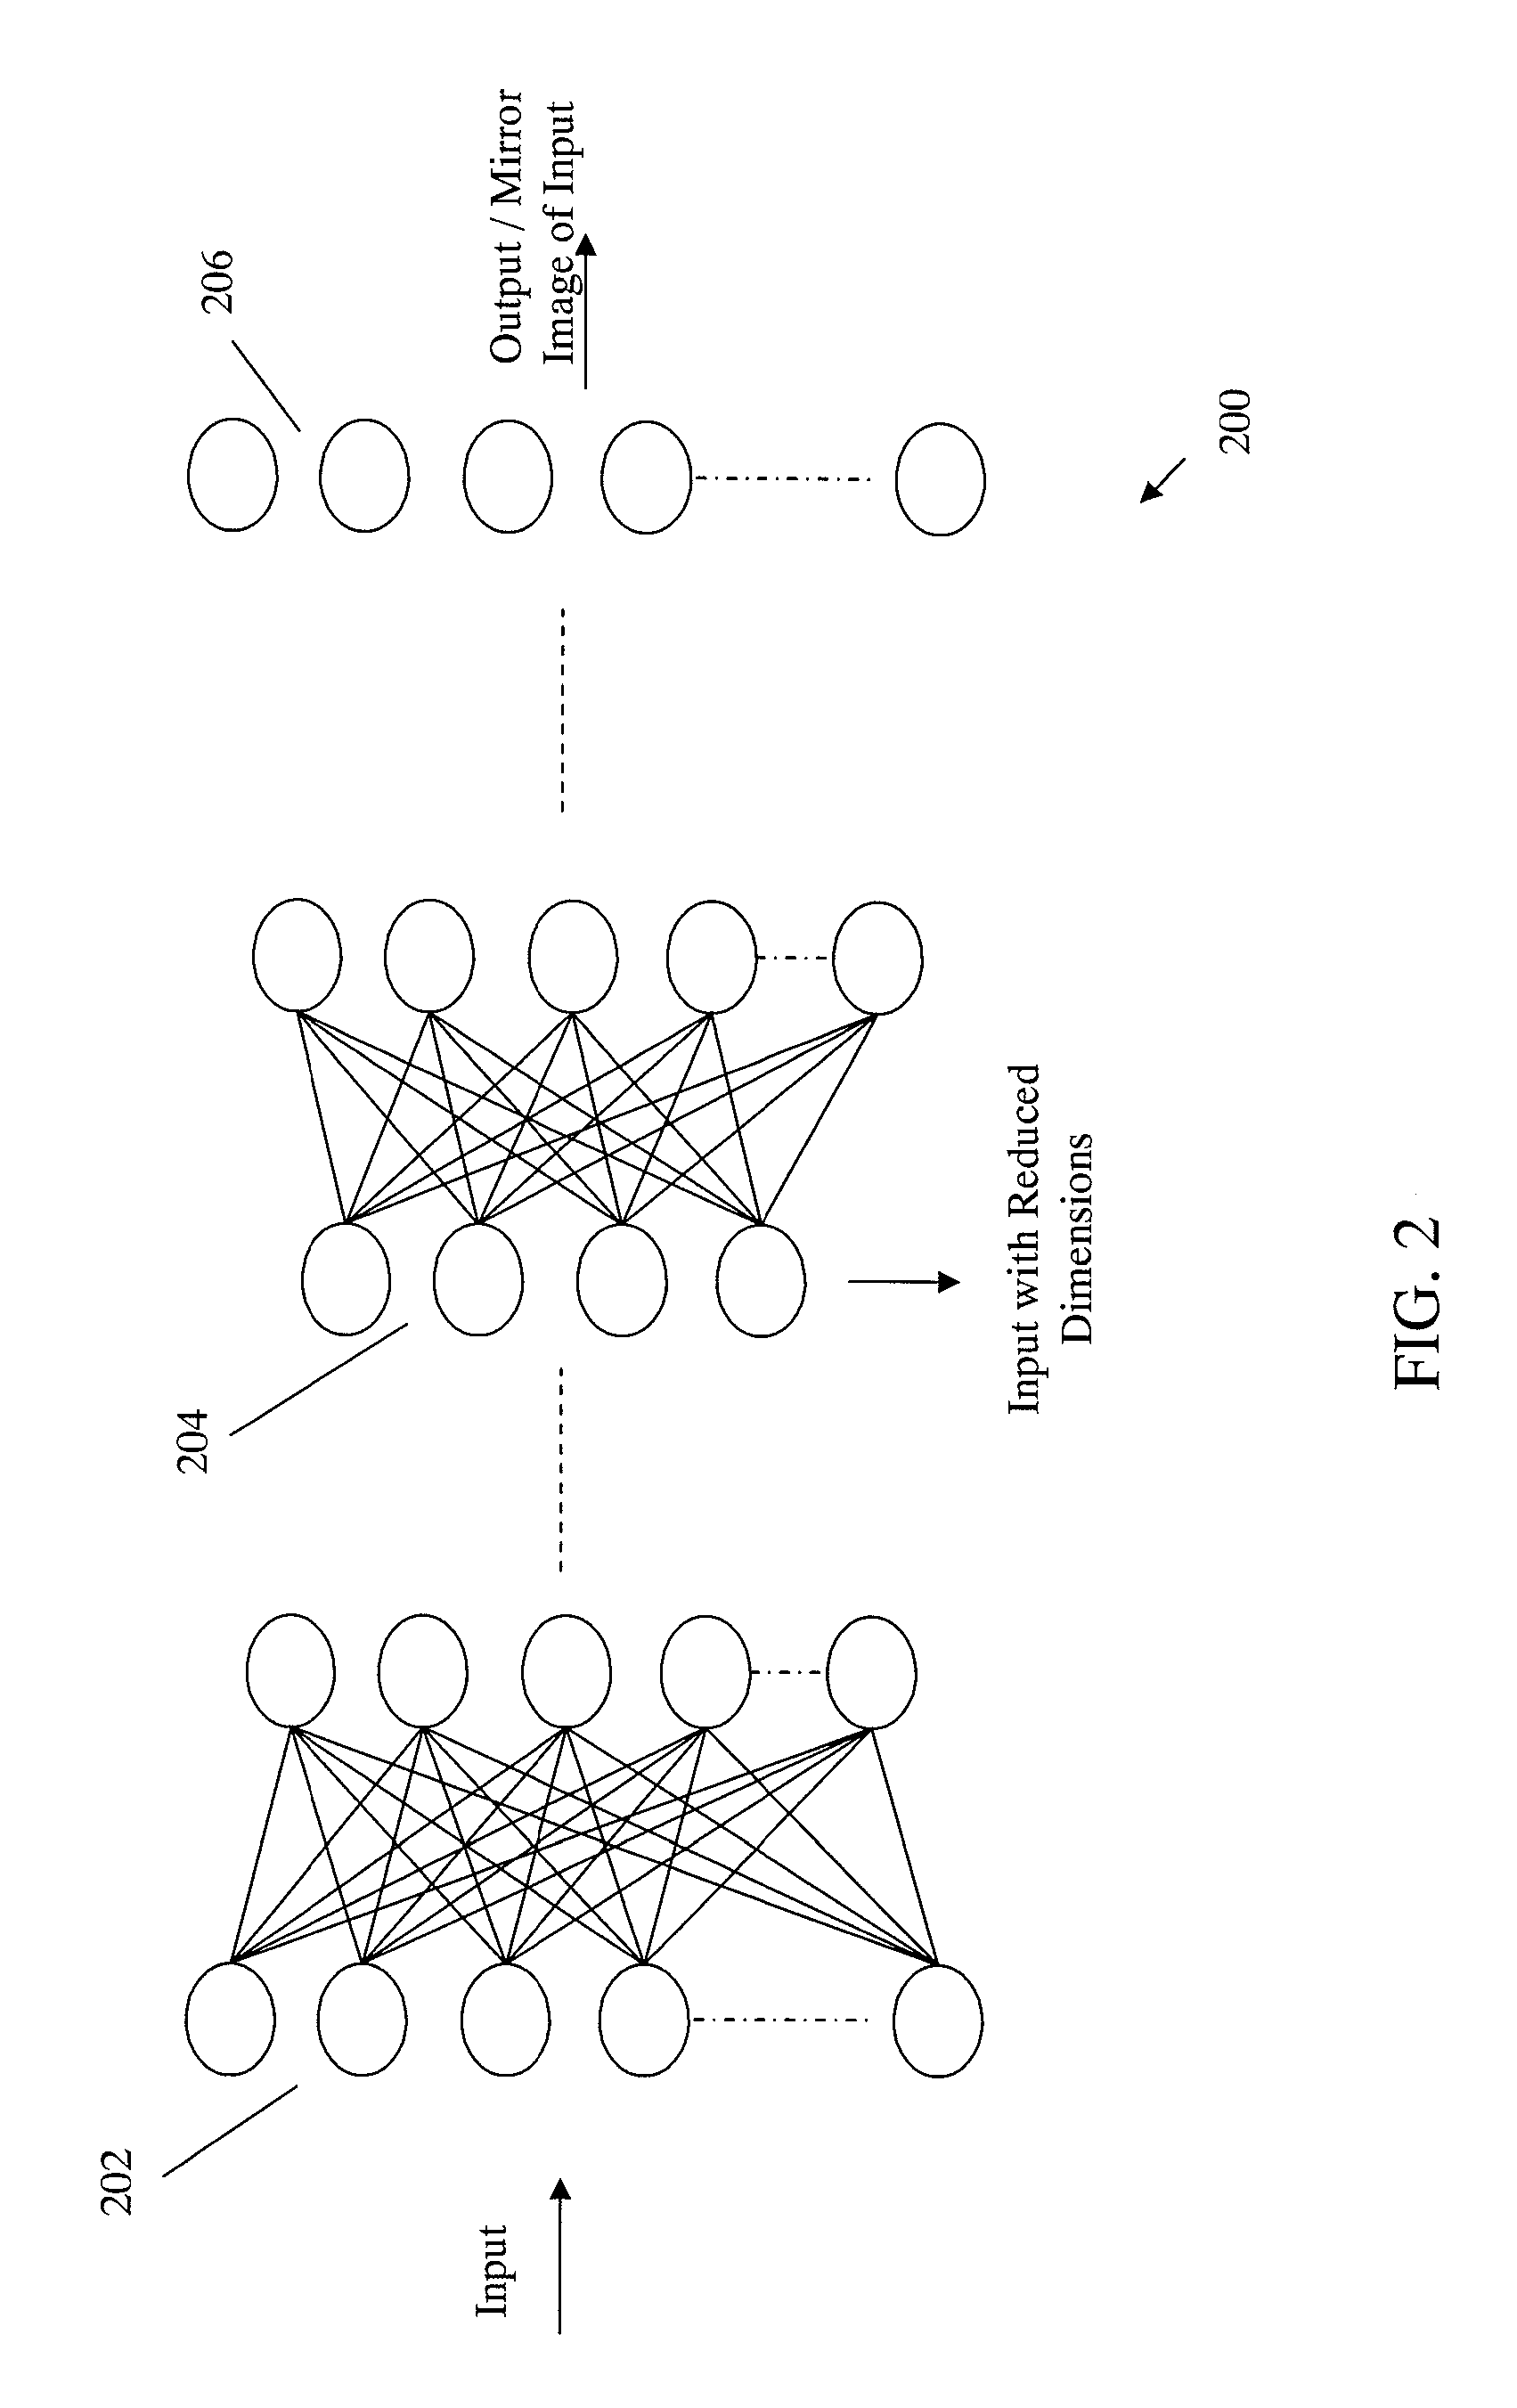 System and method for identifying patterns